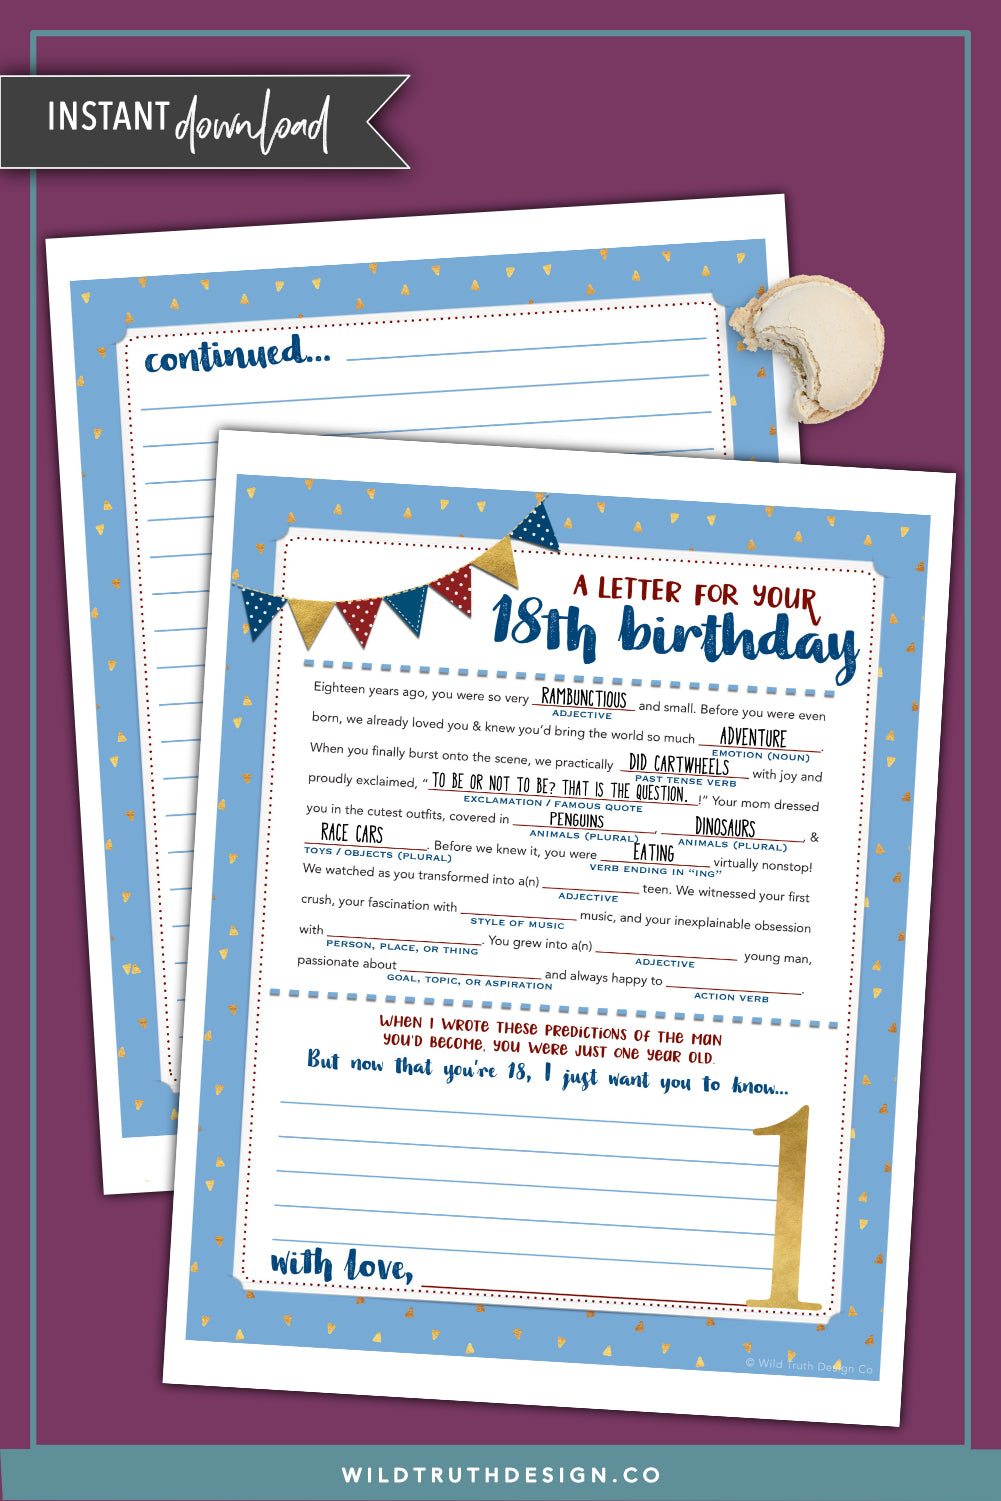 time-capsule-letter-madlib-boy-s-first-birthday-wild-truth-design-co